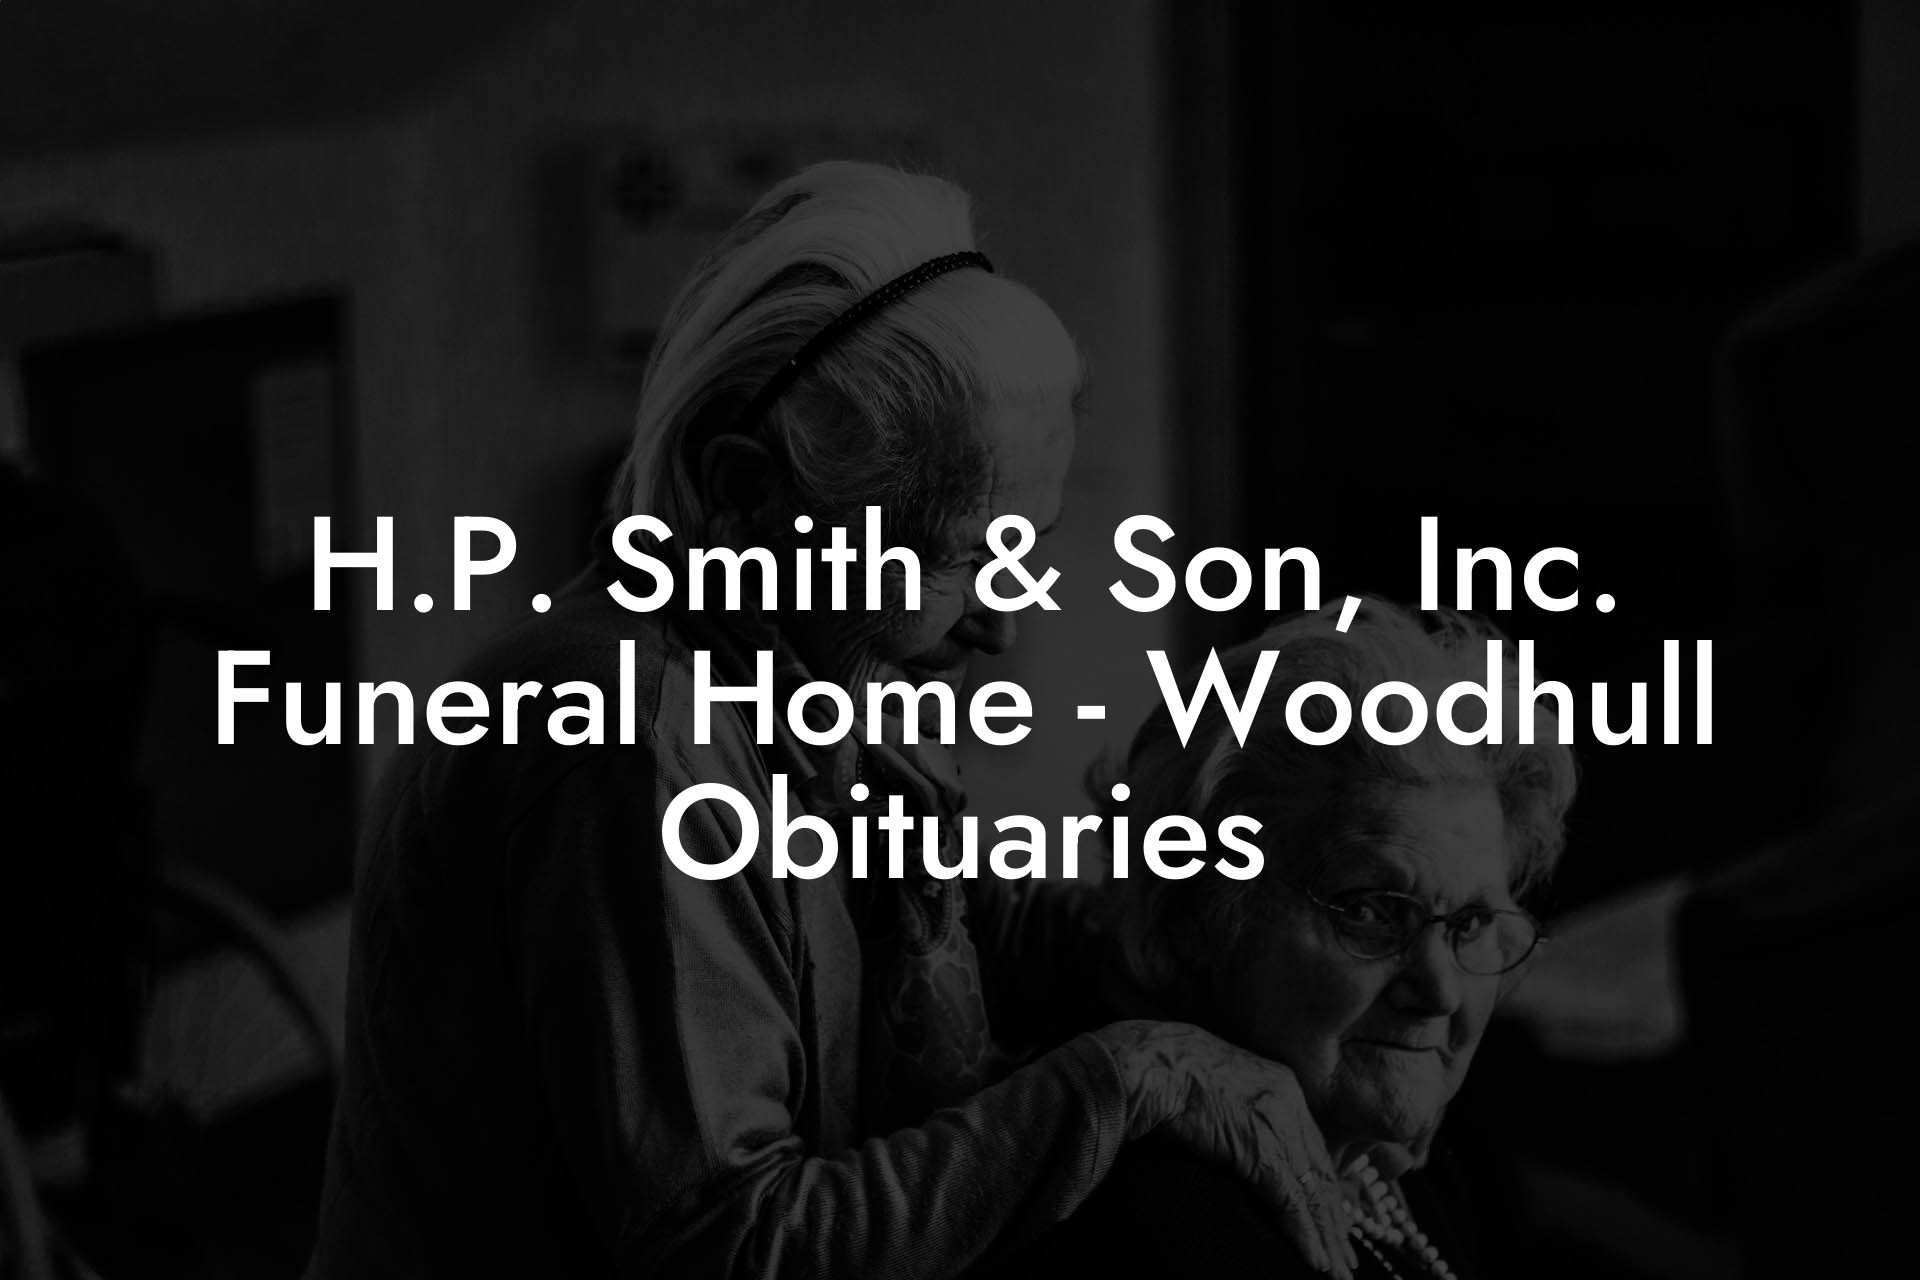 H.P. Smith & Son, Inc. Funeral Home - Woodhull Obituaries